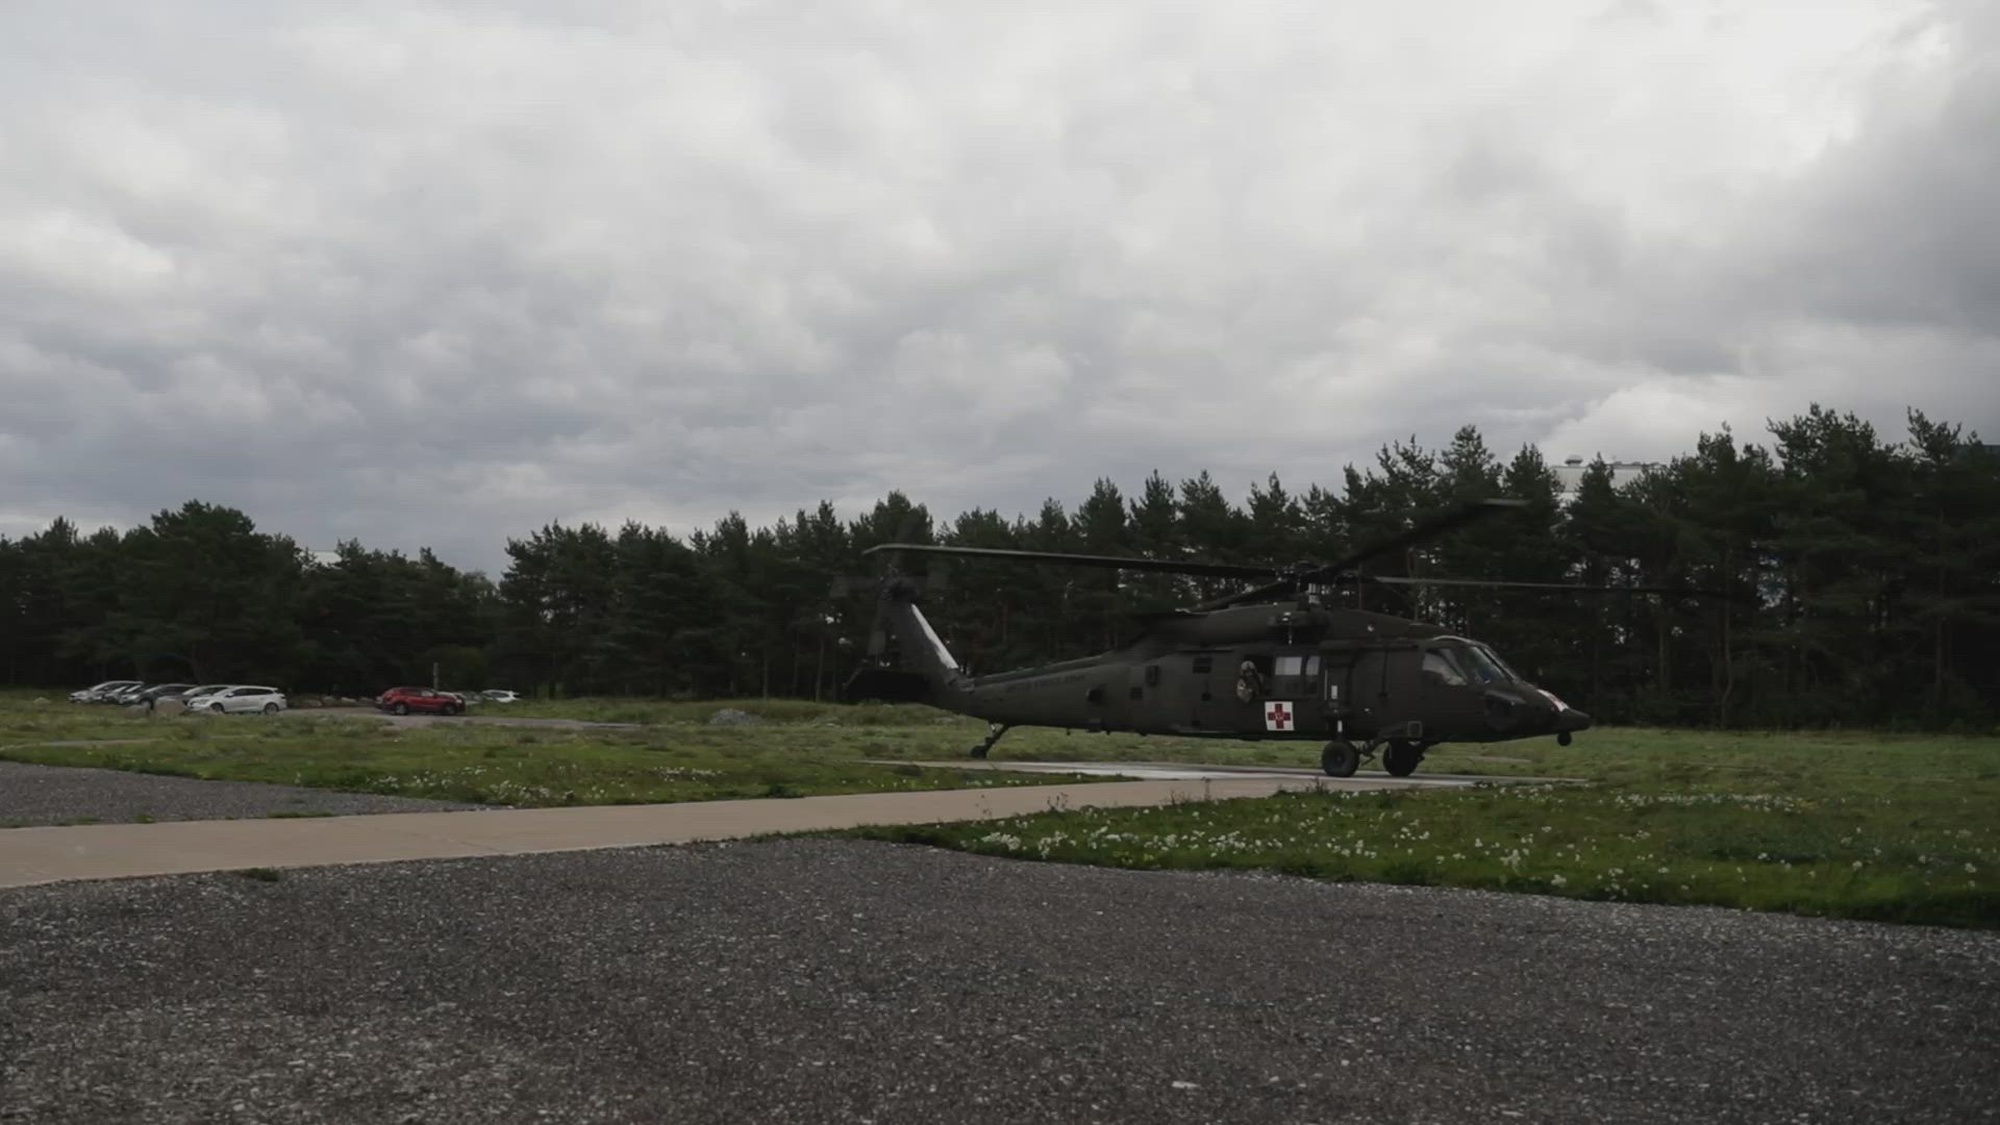 U.S. Army Soldiers with Task Force Knighthawk, 3rd Combat Aviation Brigade; and Soldiers with 1st Battalion, 506th Infantry Regiment "Red Currahee," 1st Brigade Combat Team, 101st Airborne Division (Air Assault), both supporting 4th Infantry Division; and North Estonia Medical Centre staff, conduct a medical evacuation exercise in Tallinn, Estonia, Sept. 5. The training marked the second recent medevac exercise with Estonian hospitals, to expand the scope of operations, and advance interoperability between U.S. Army medics and civilian healthcare facilities. The 4th Inf. Div.'s mission in Europe is to engage in multinational training and exercises across the continent, working alongside NATO allies and regional security partners to provide combat-credible forces to V Corps, America’s forward deployed corps in Europe.